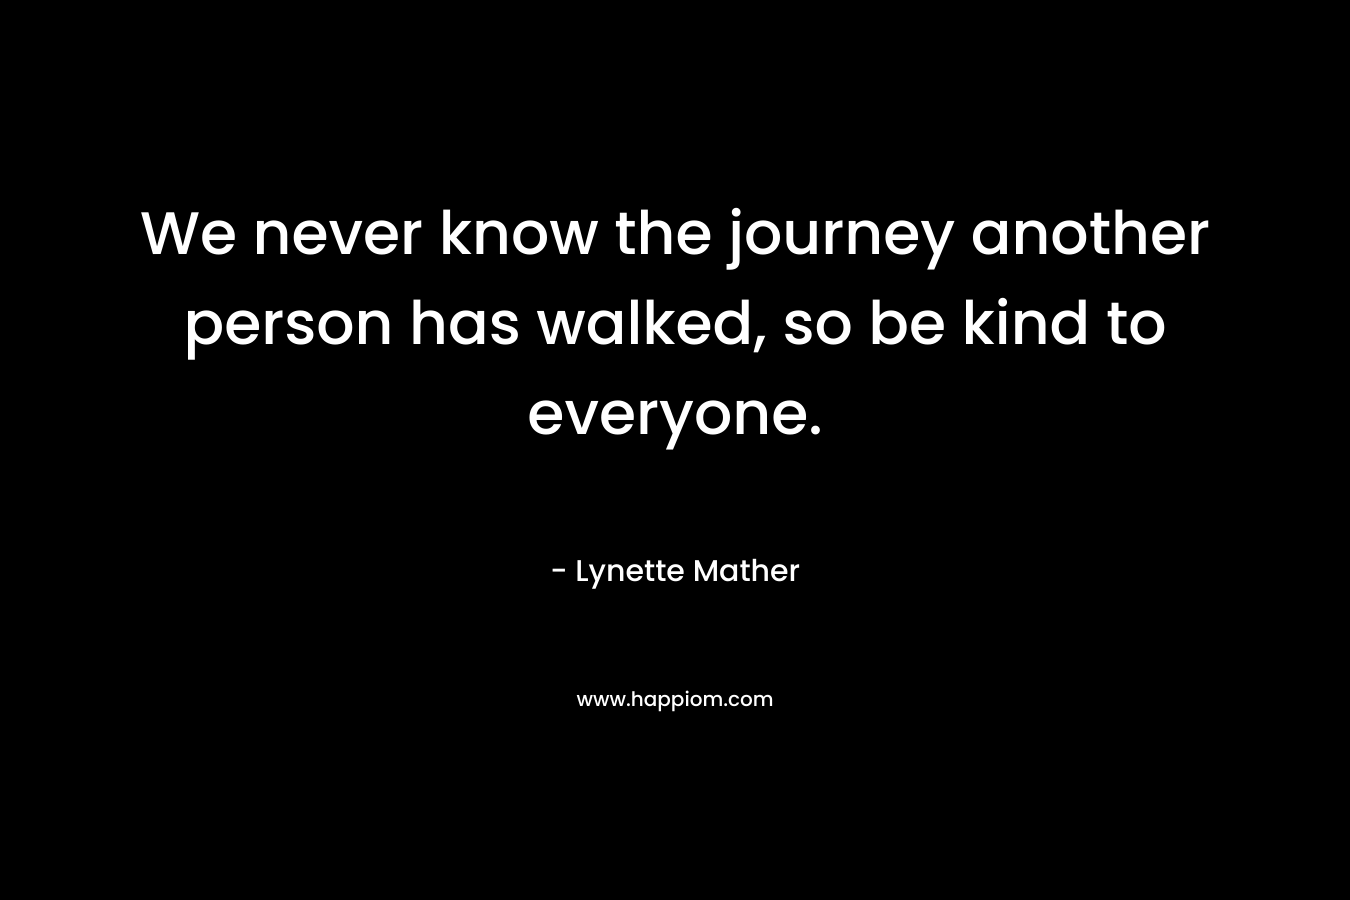 We never know the journey another person has walked, so be kind to everyone. – Lynette Mather